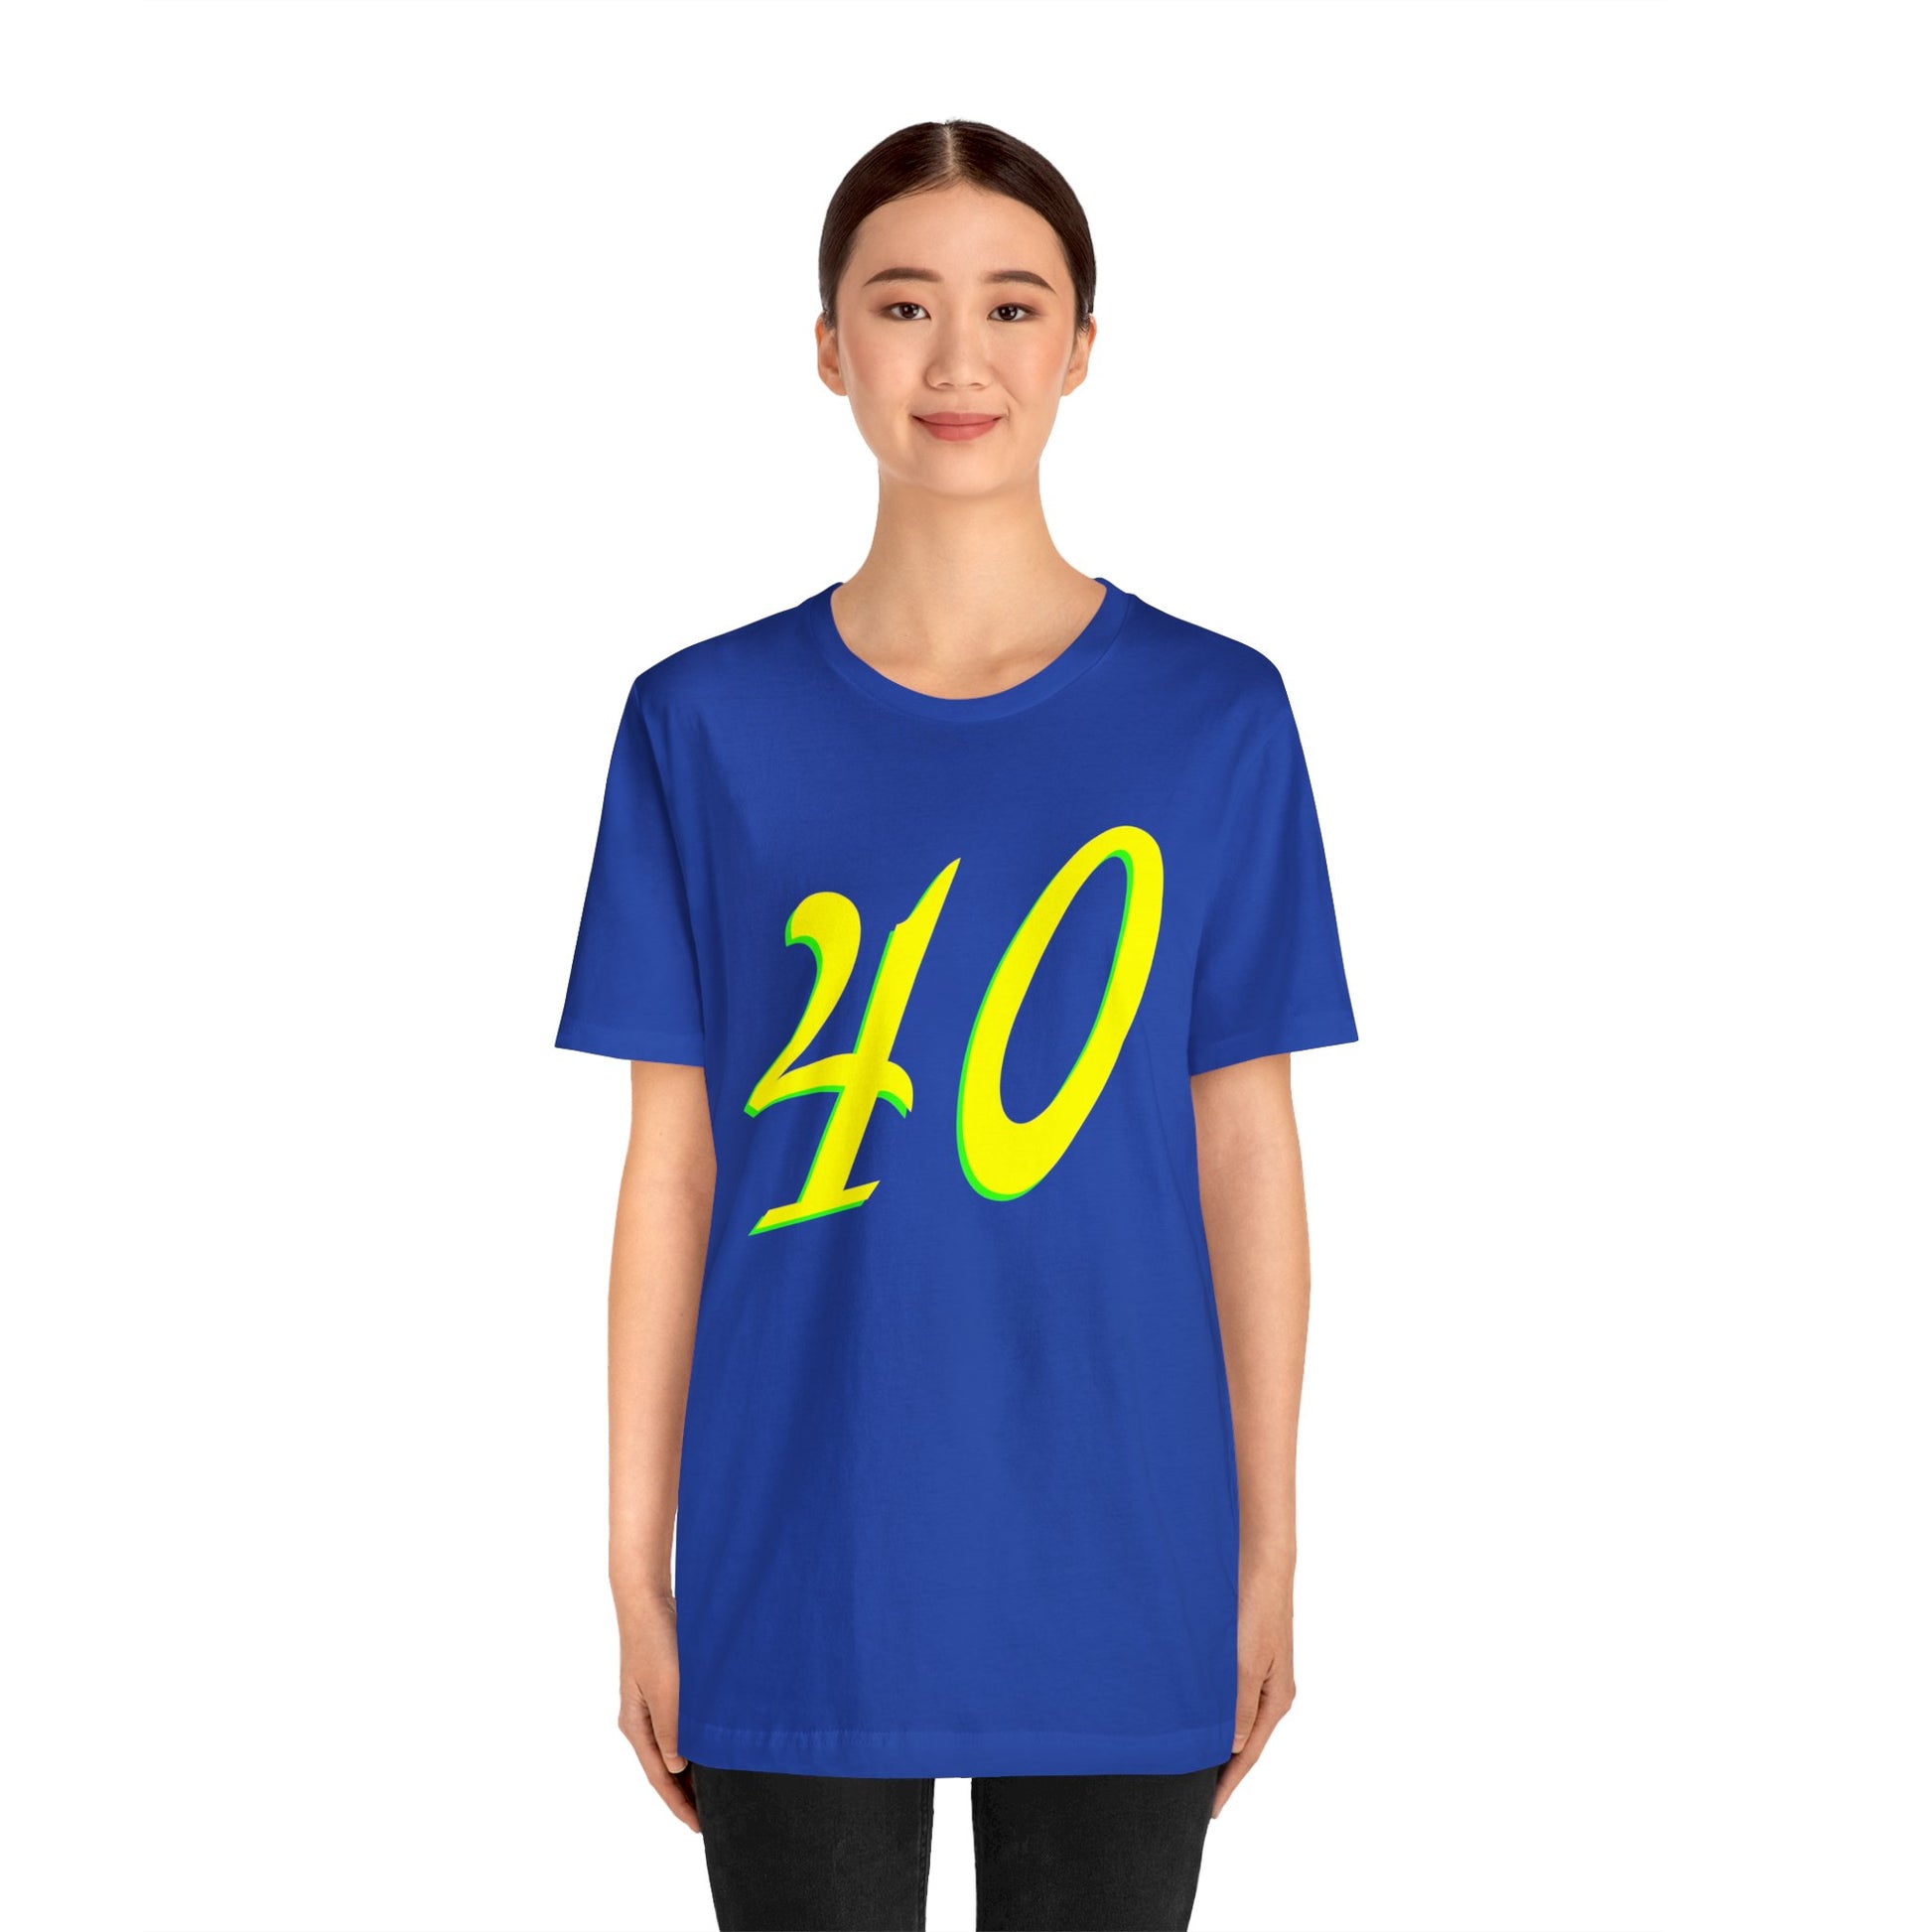 Number 40 Design - Soft Cotton Tee for birthdays and celebrations, Gift for friends and family, Multiple Options by clothezy.com in Black Size Medium - Buy Now